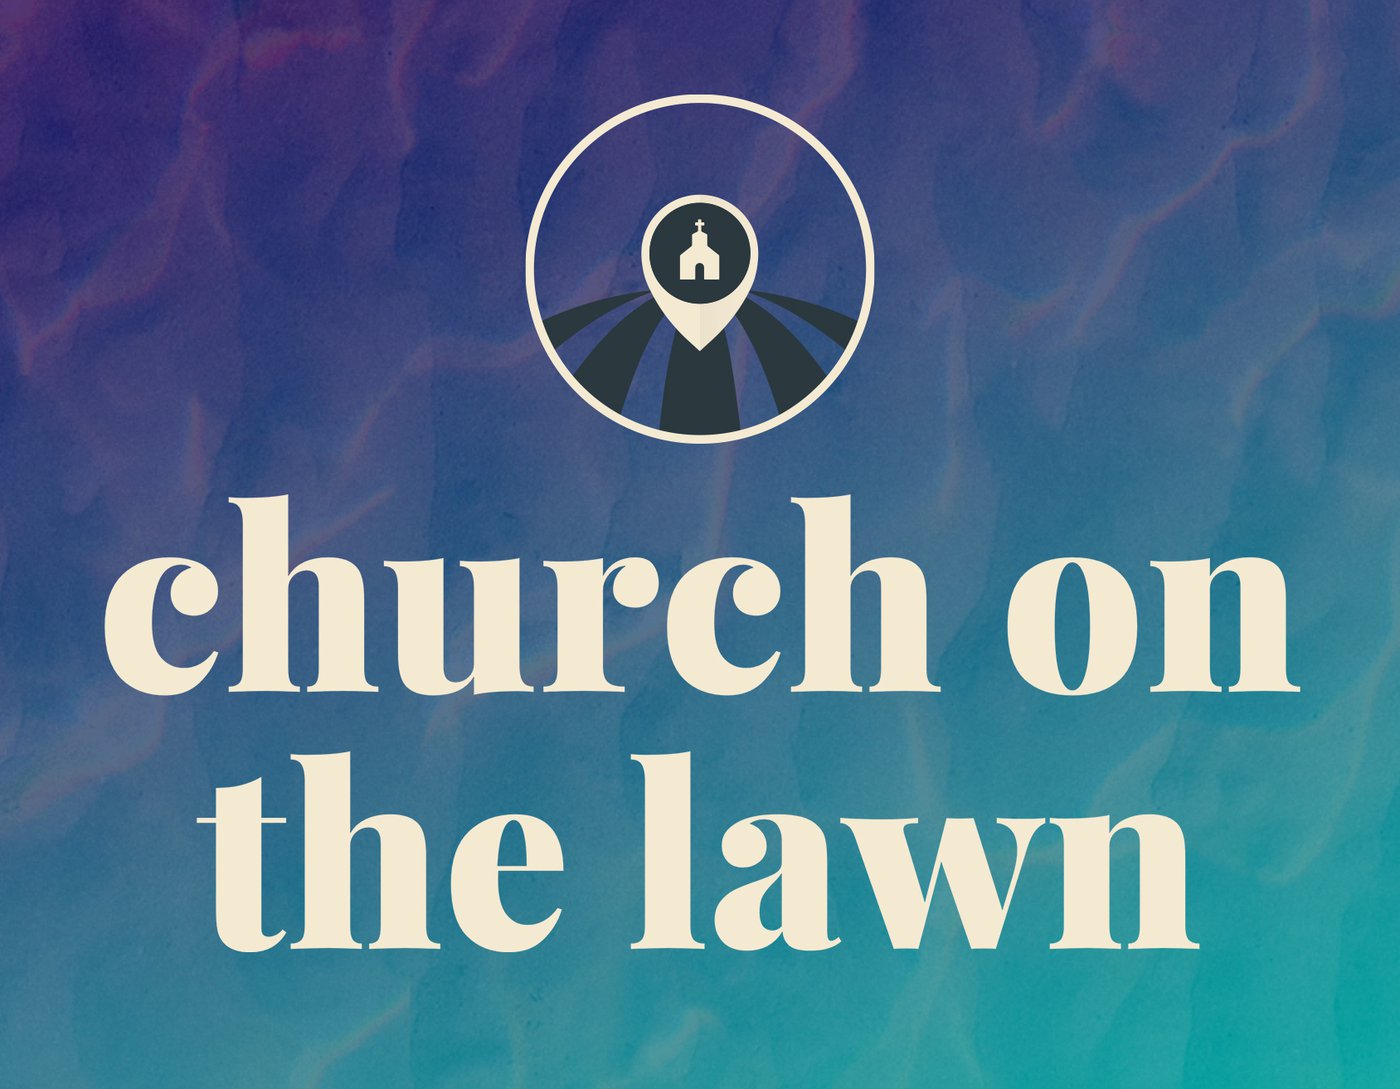 Join us for our annual Church on the Lawn July 3rd at 10am.